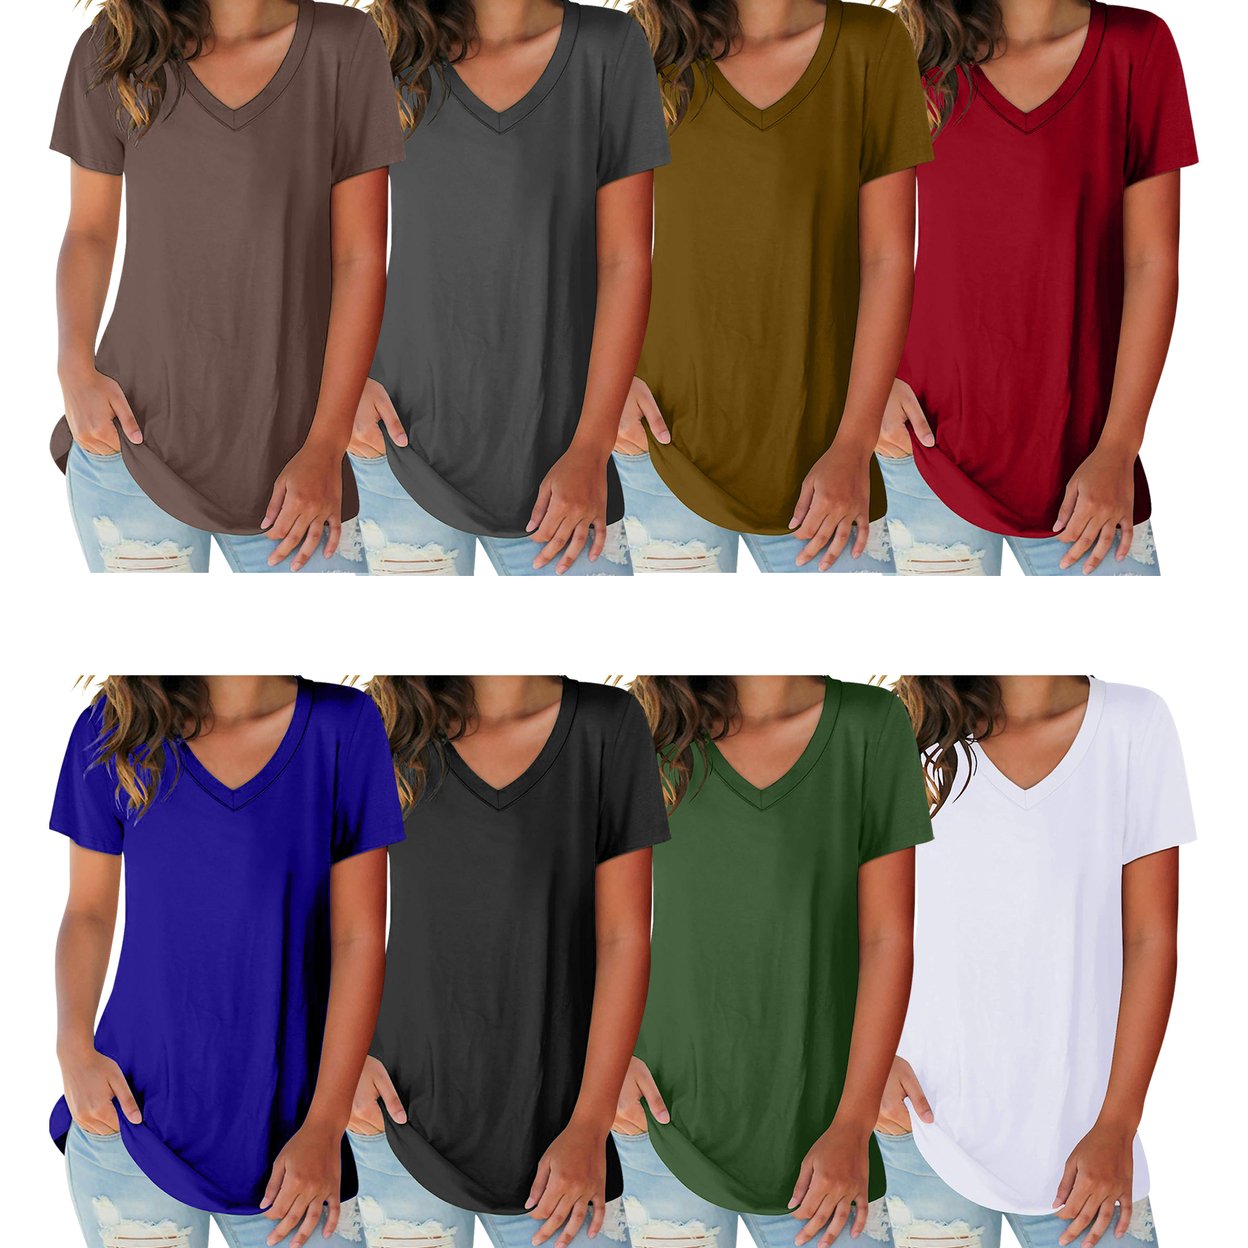 2-Pack: Women's Ultra Soft Smooth Cotton Blend Basic V-Neck Short Sleeve Shirts - White & Brown, Small